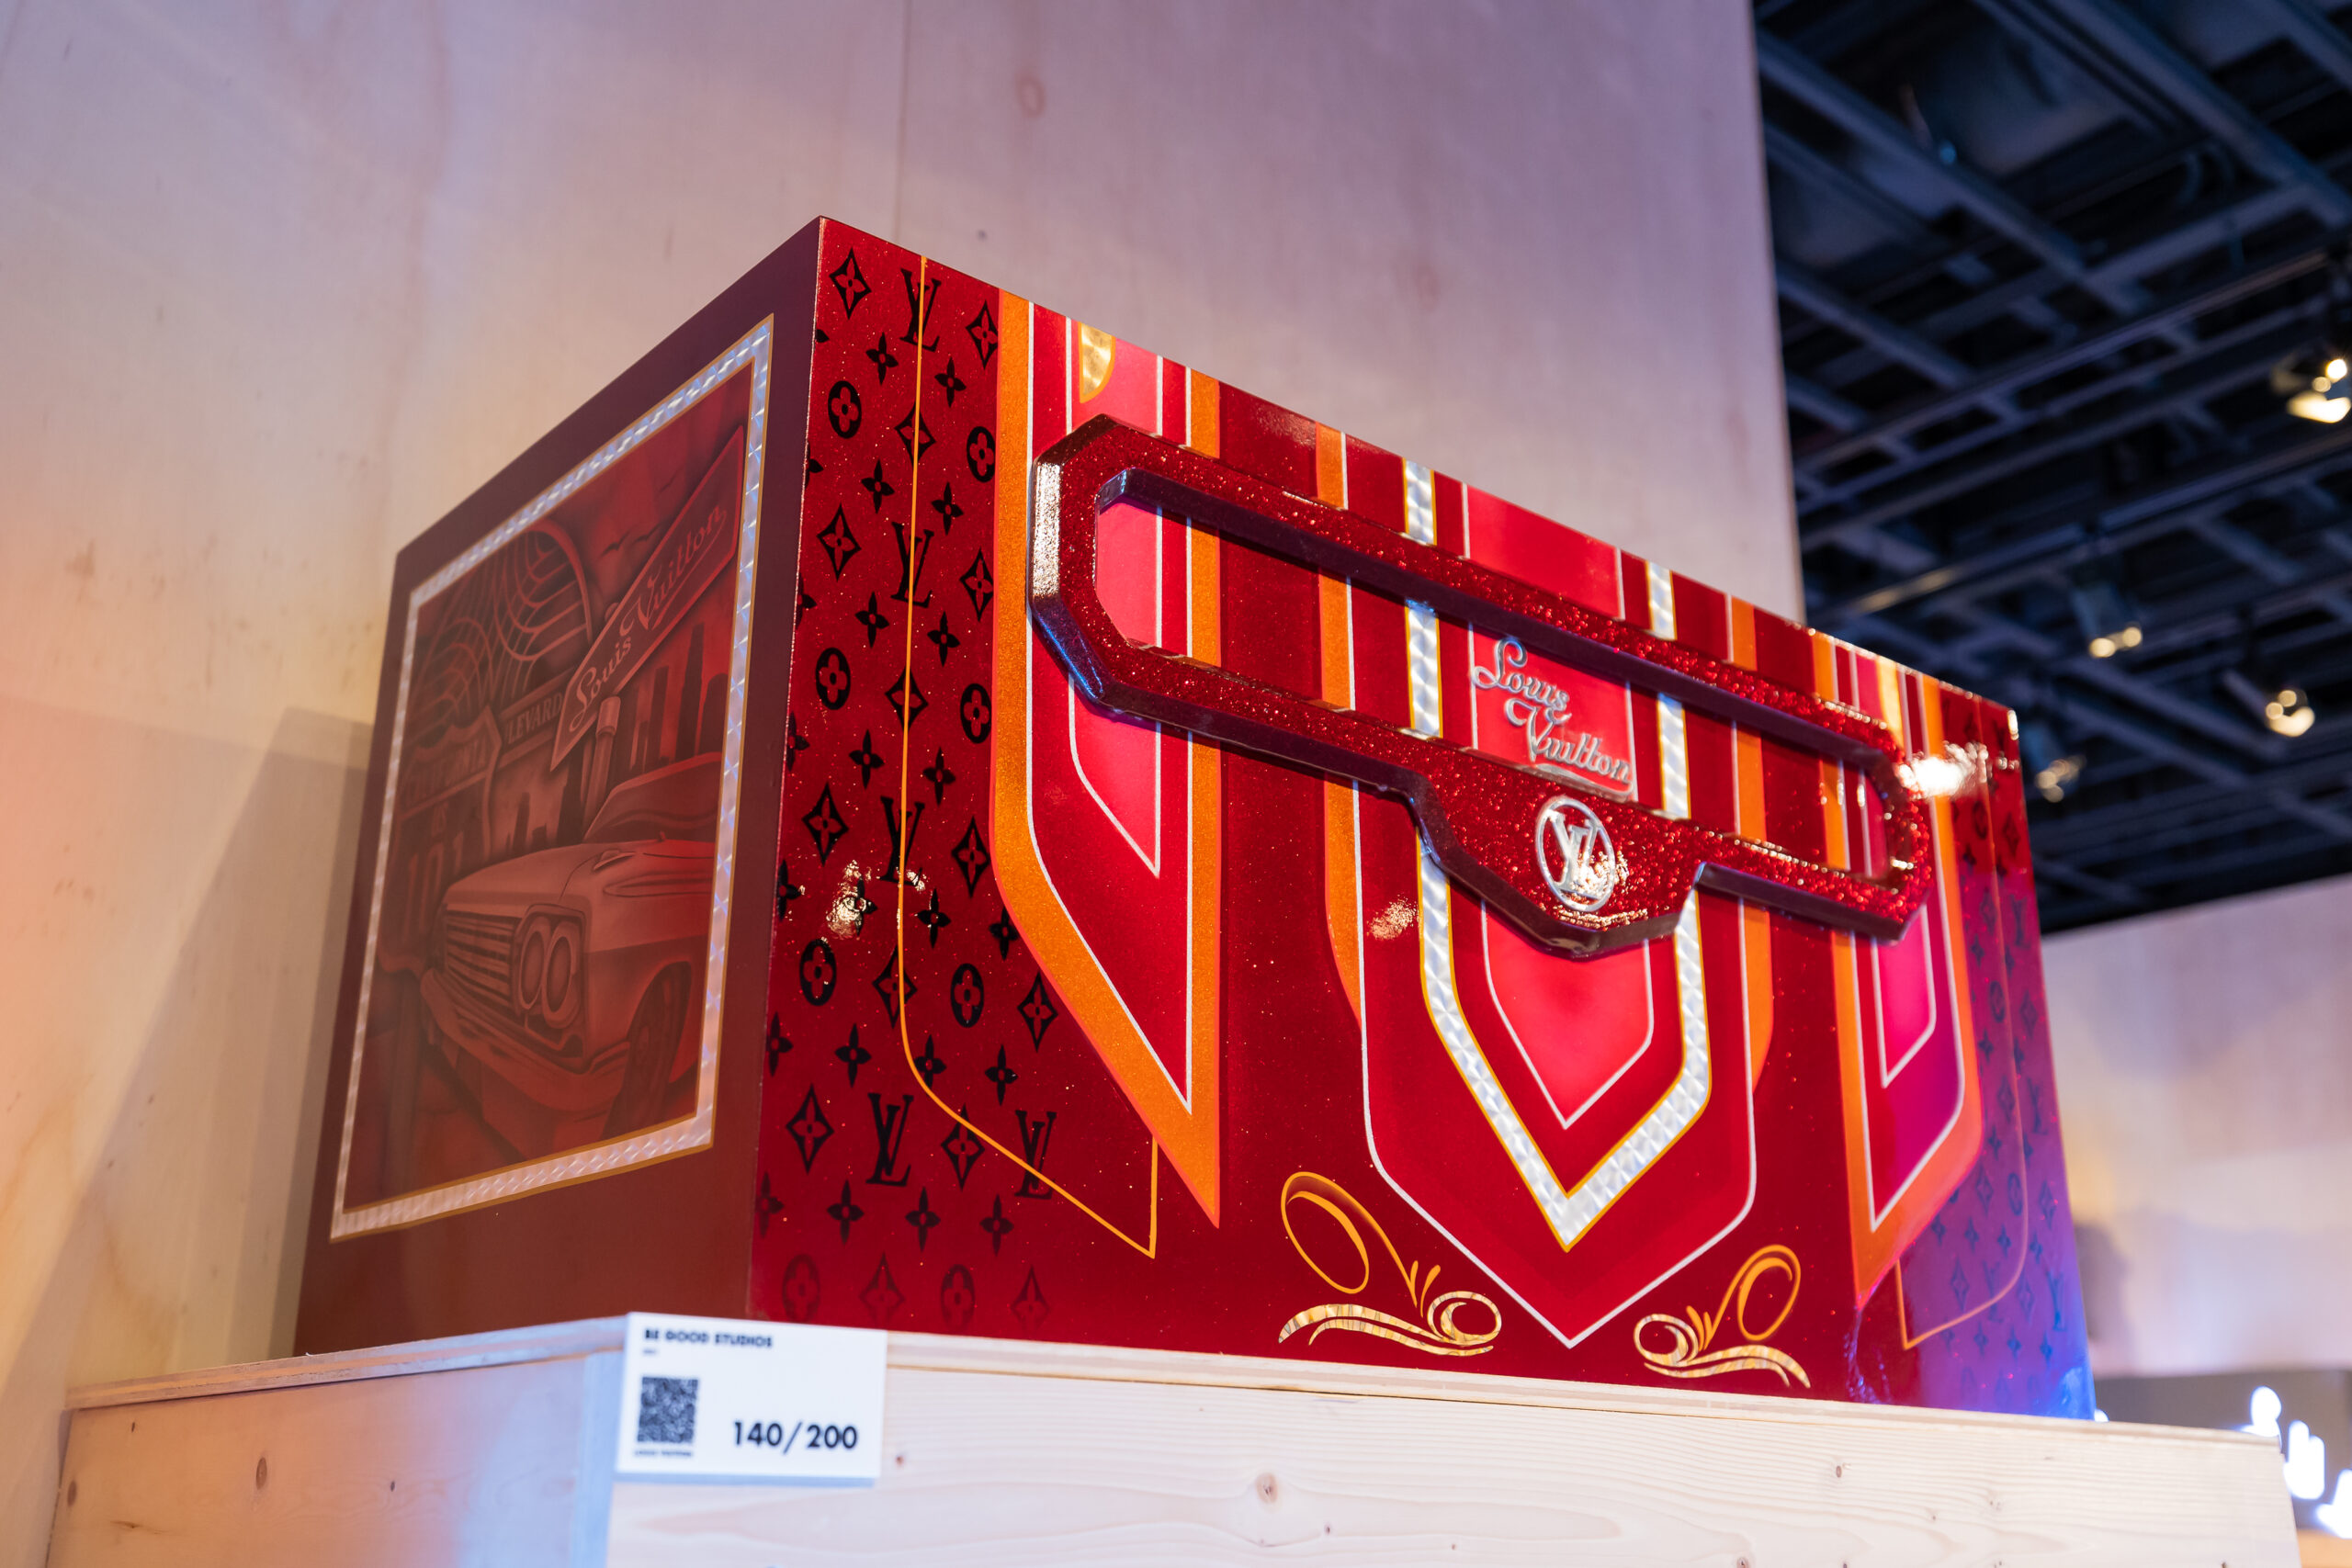 Inside Louis Vuitton 200 Trunks 200 Visionaries: The Exhibition